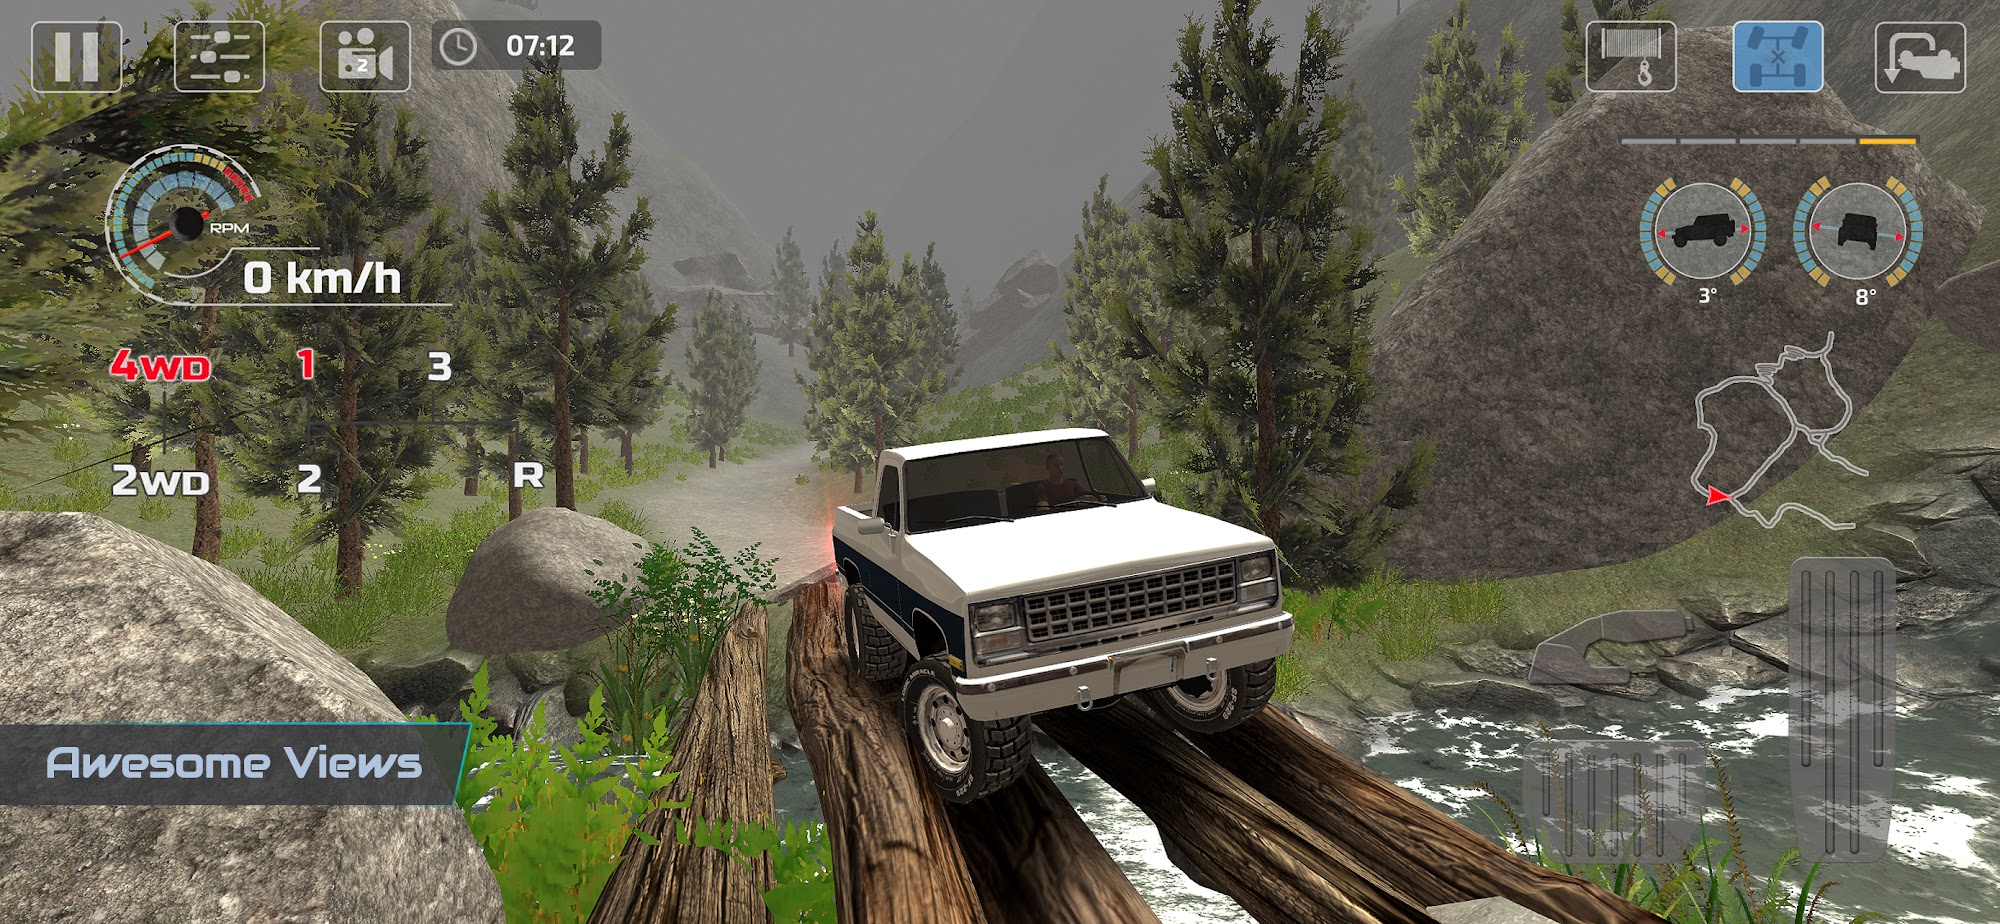 Full version of Android Cars game apk OffRoad Drive Pro for tablet and phone.